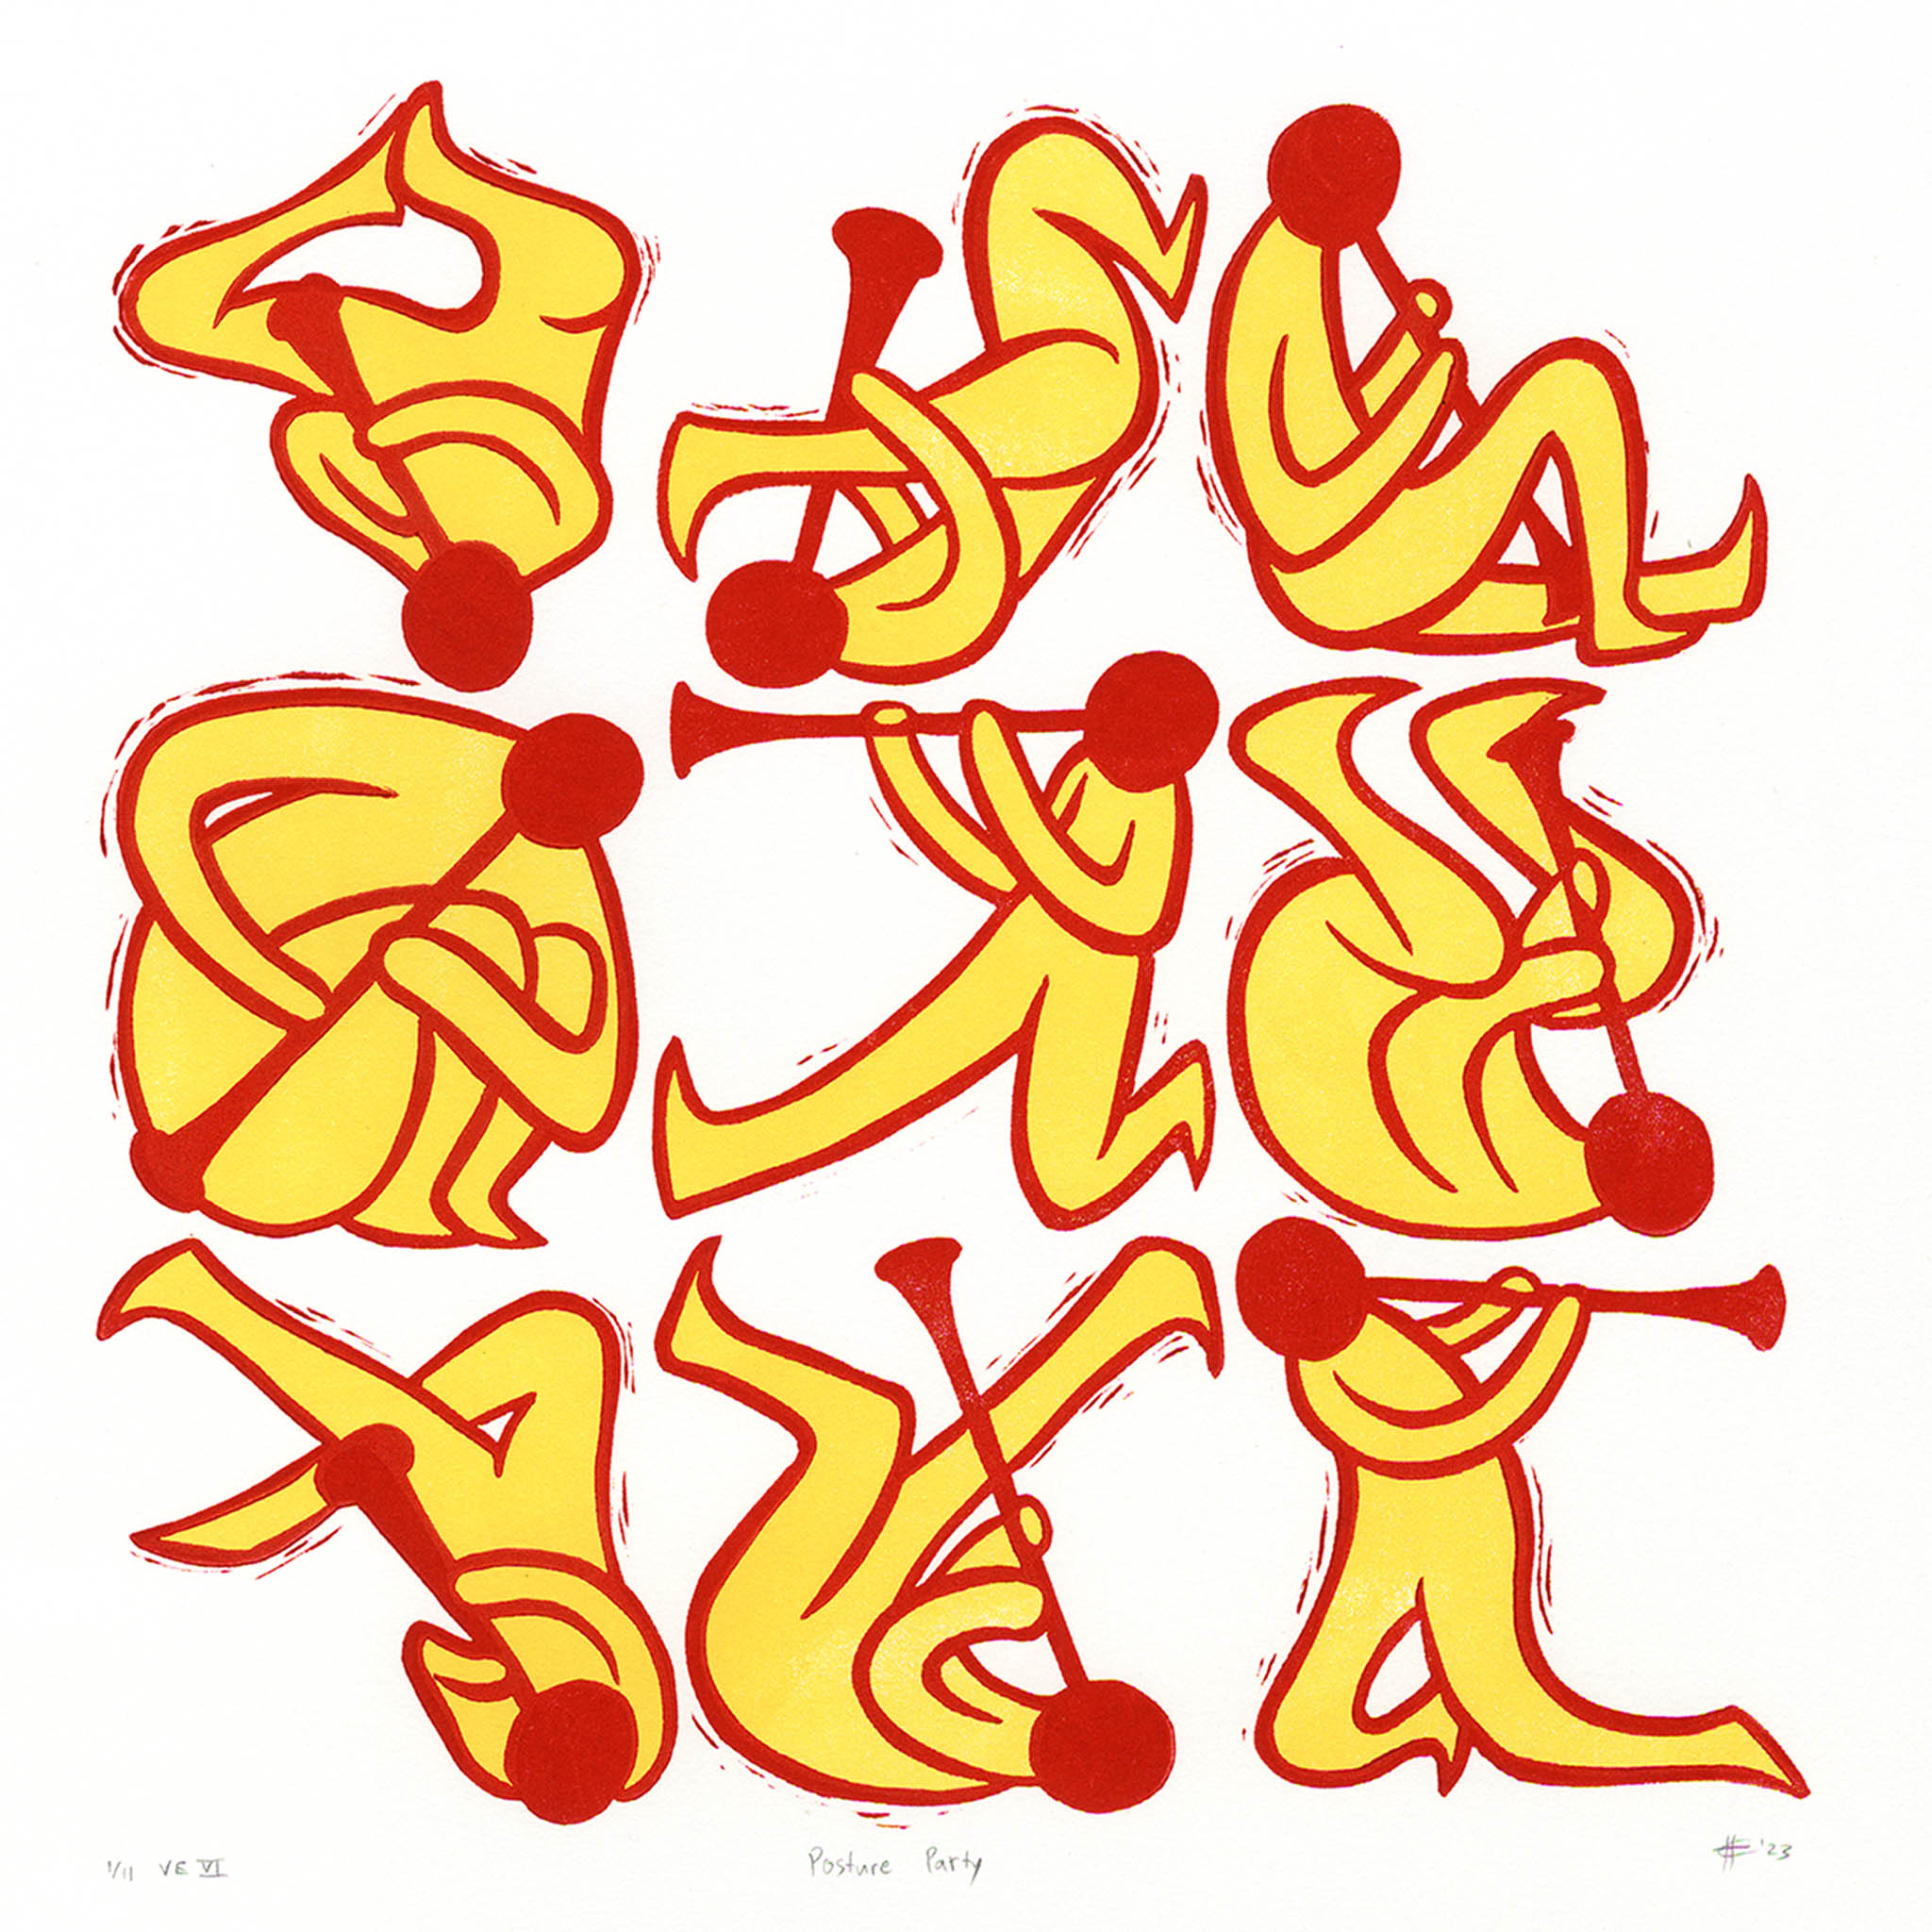 Posture Party Clarinet Linocut Art Print Cheeseburger (red and yellow)